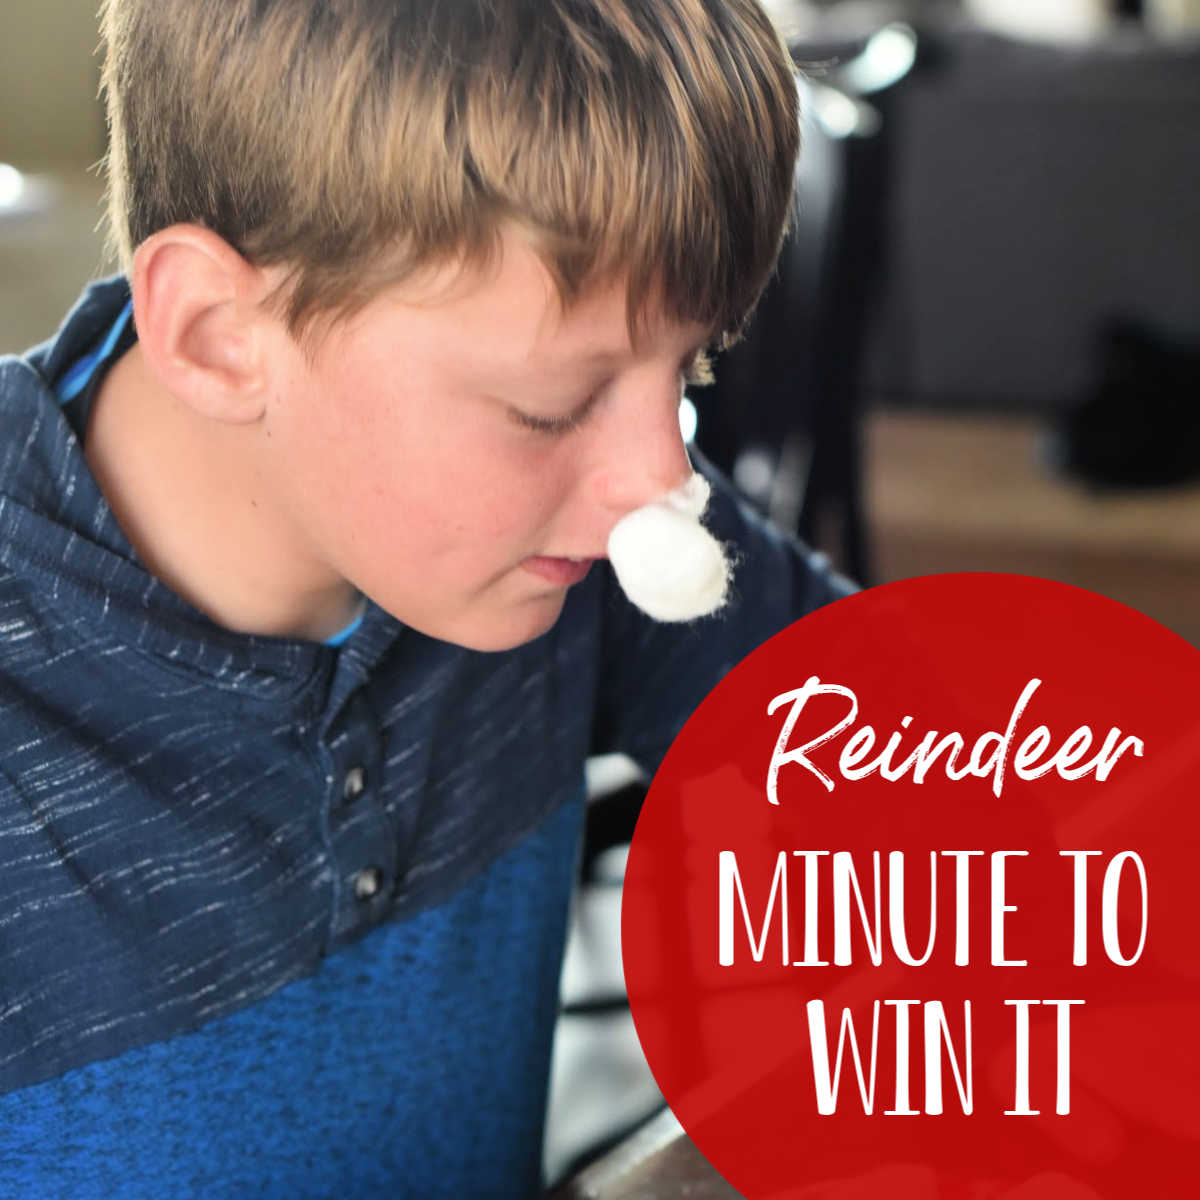 Minute to Win It Christmas Games